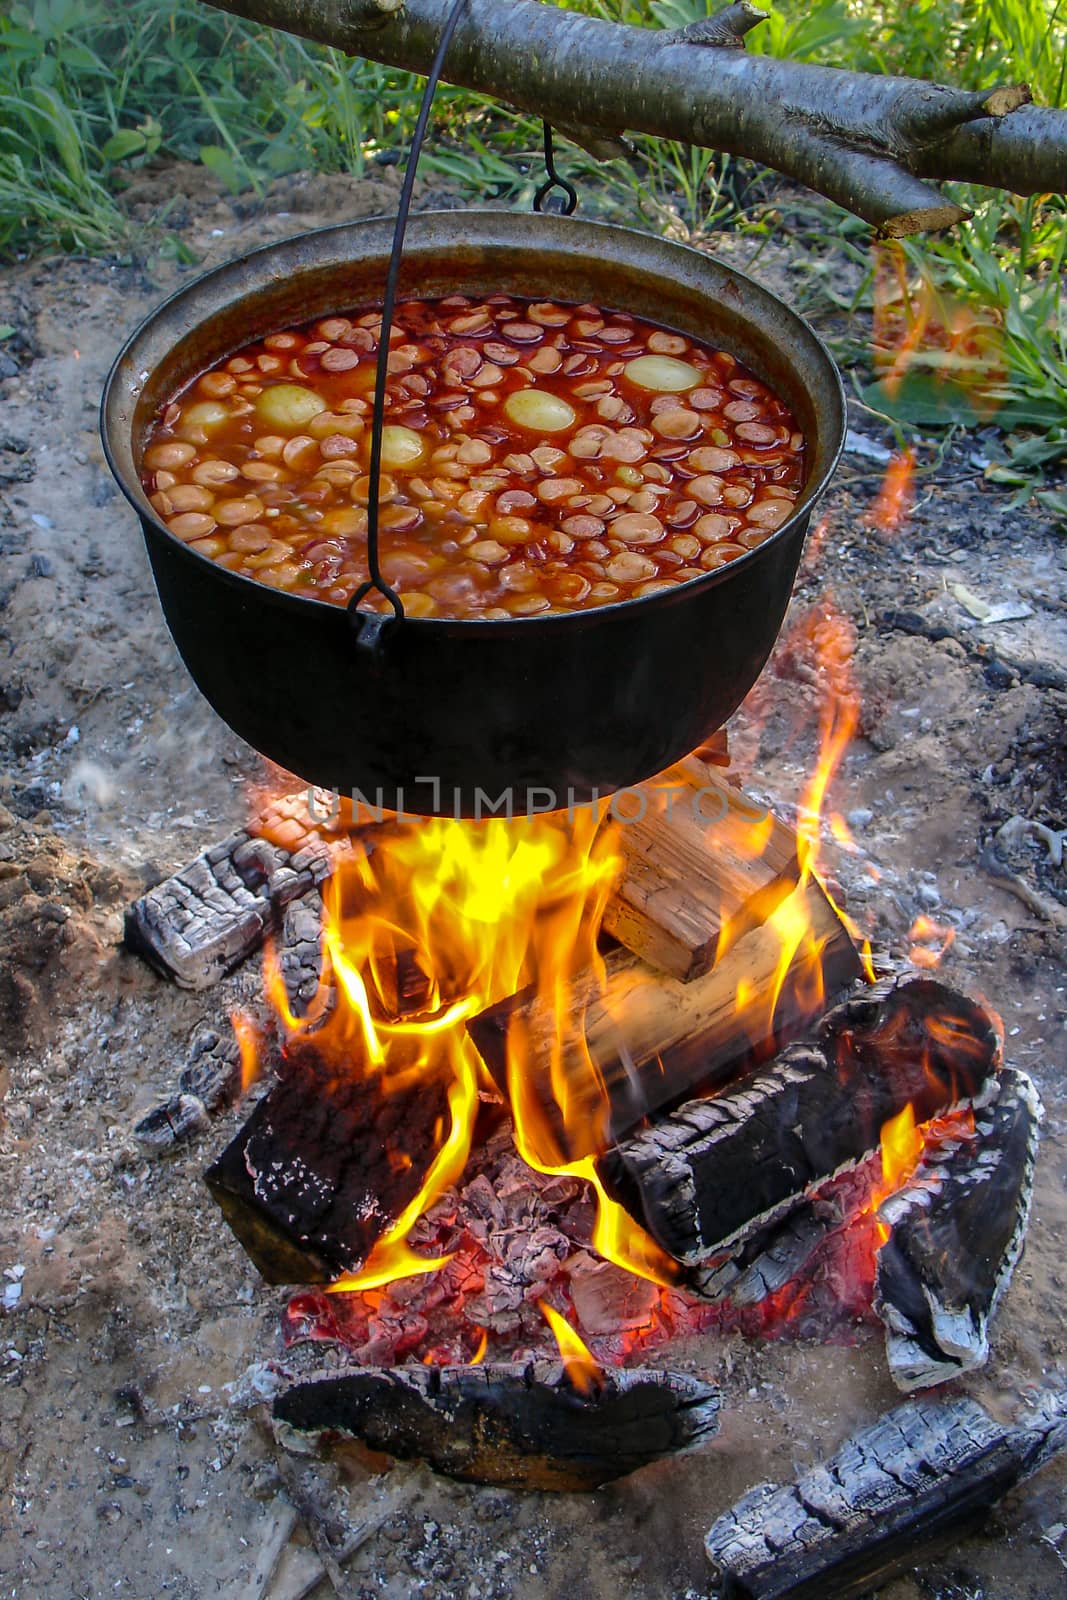 Cooking soup in cast iron boiler on burning campfire. Pot with soup over the open fire outdoors. Tourism in Latvia. Soup cooking on the fire outdoor for camping trip.